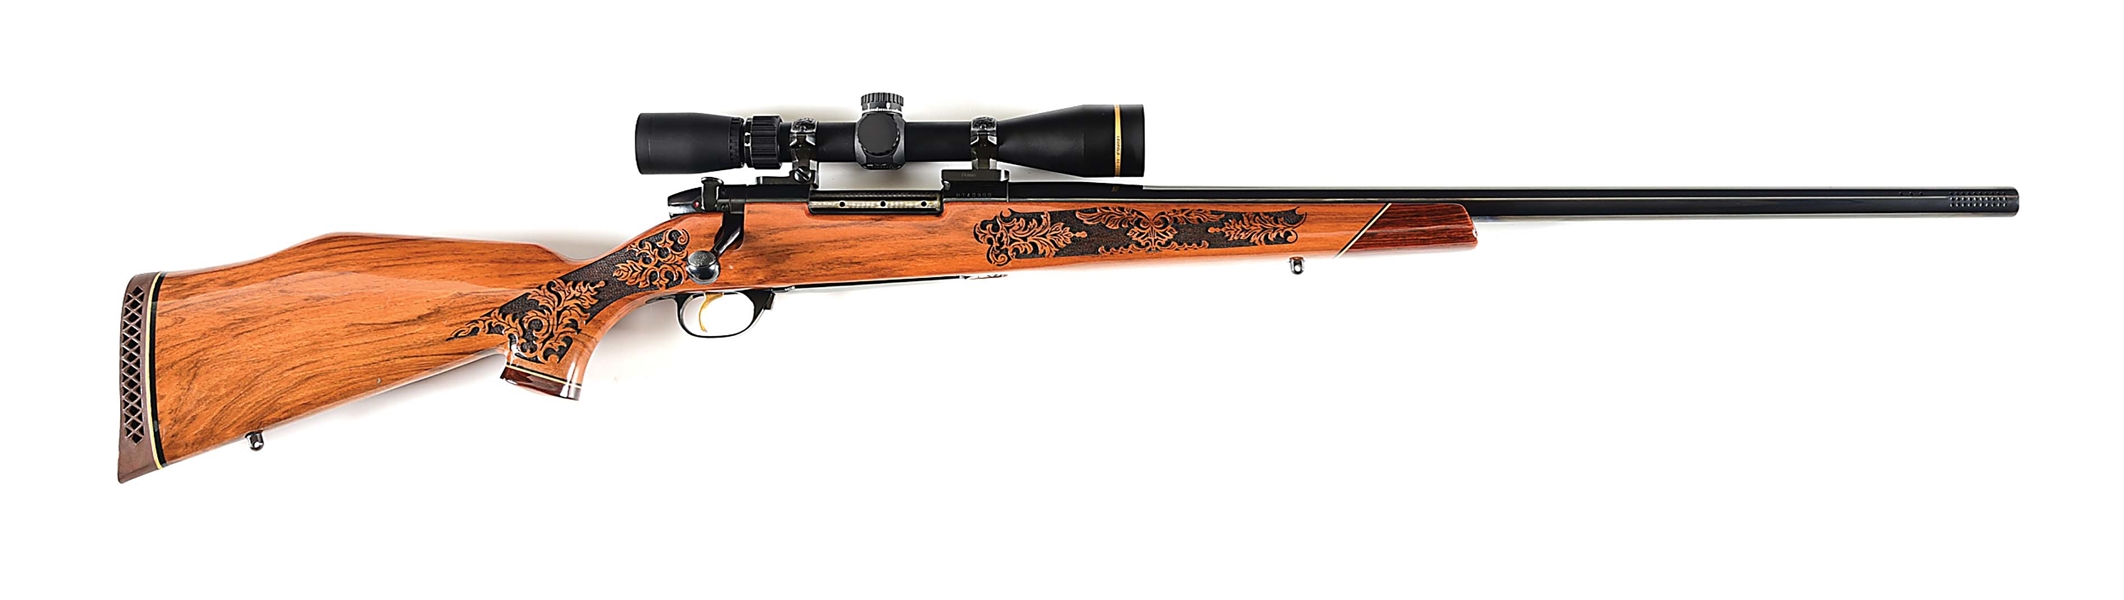 (M) WEATHERBY MARK V LAZERMARK BOLT ACTION RIFLE IN .460 WEATHERBY MAGNUM